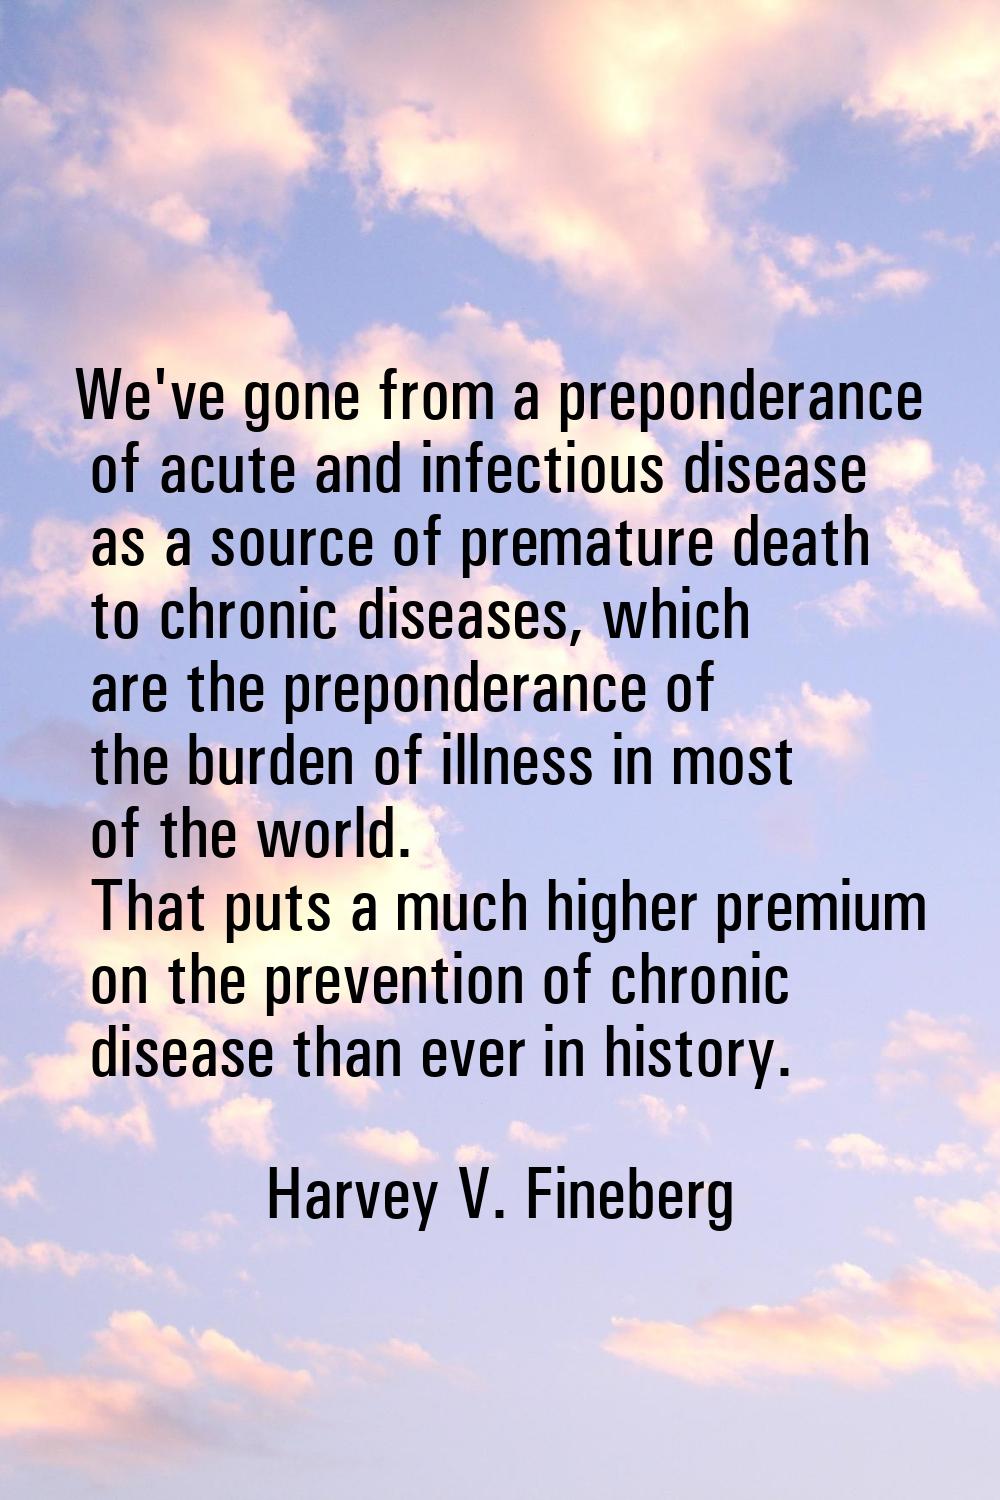 We've gone from a preponderance of acute and infectious disease as a source of premature death to c